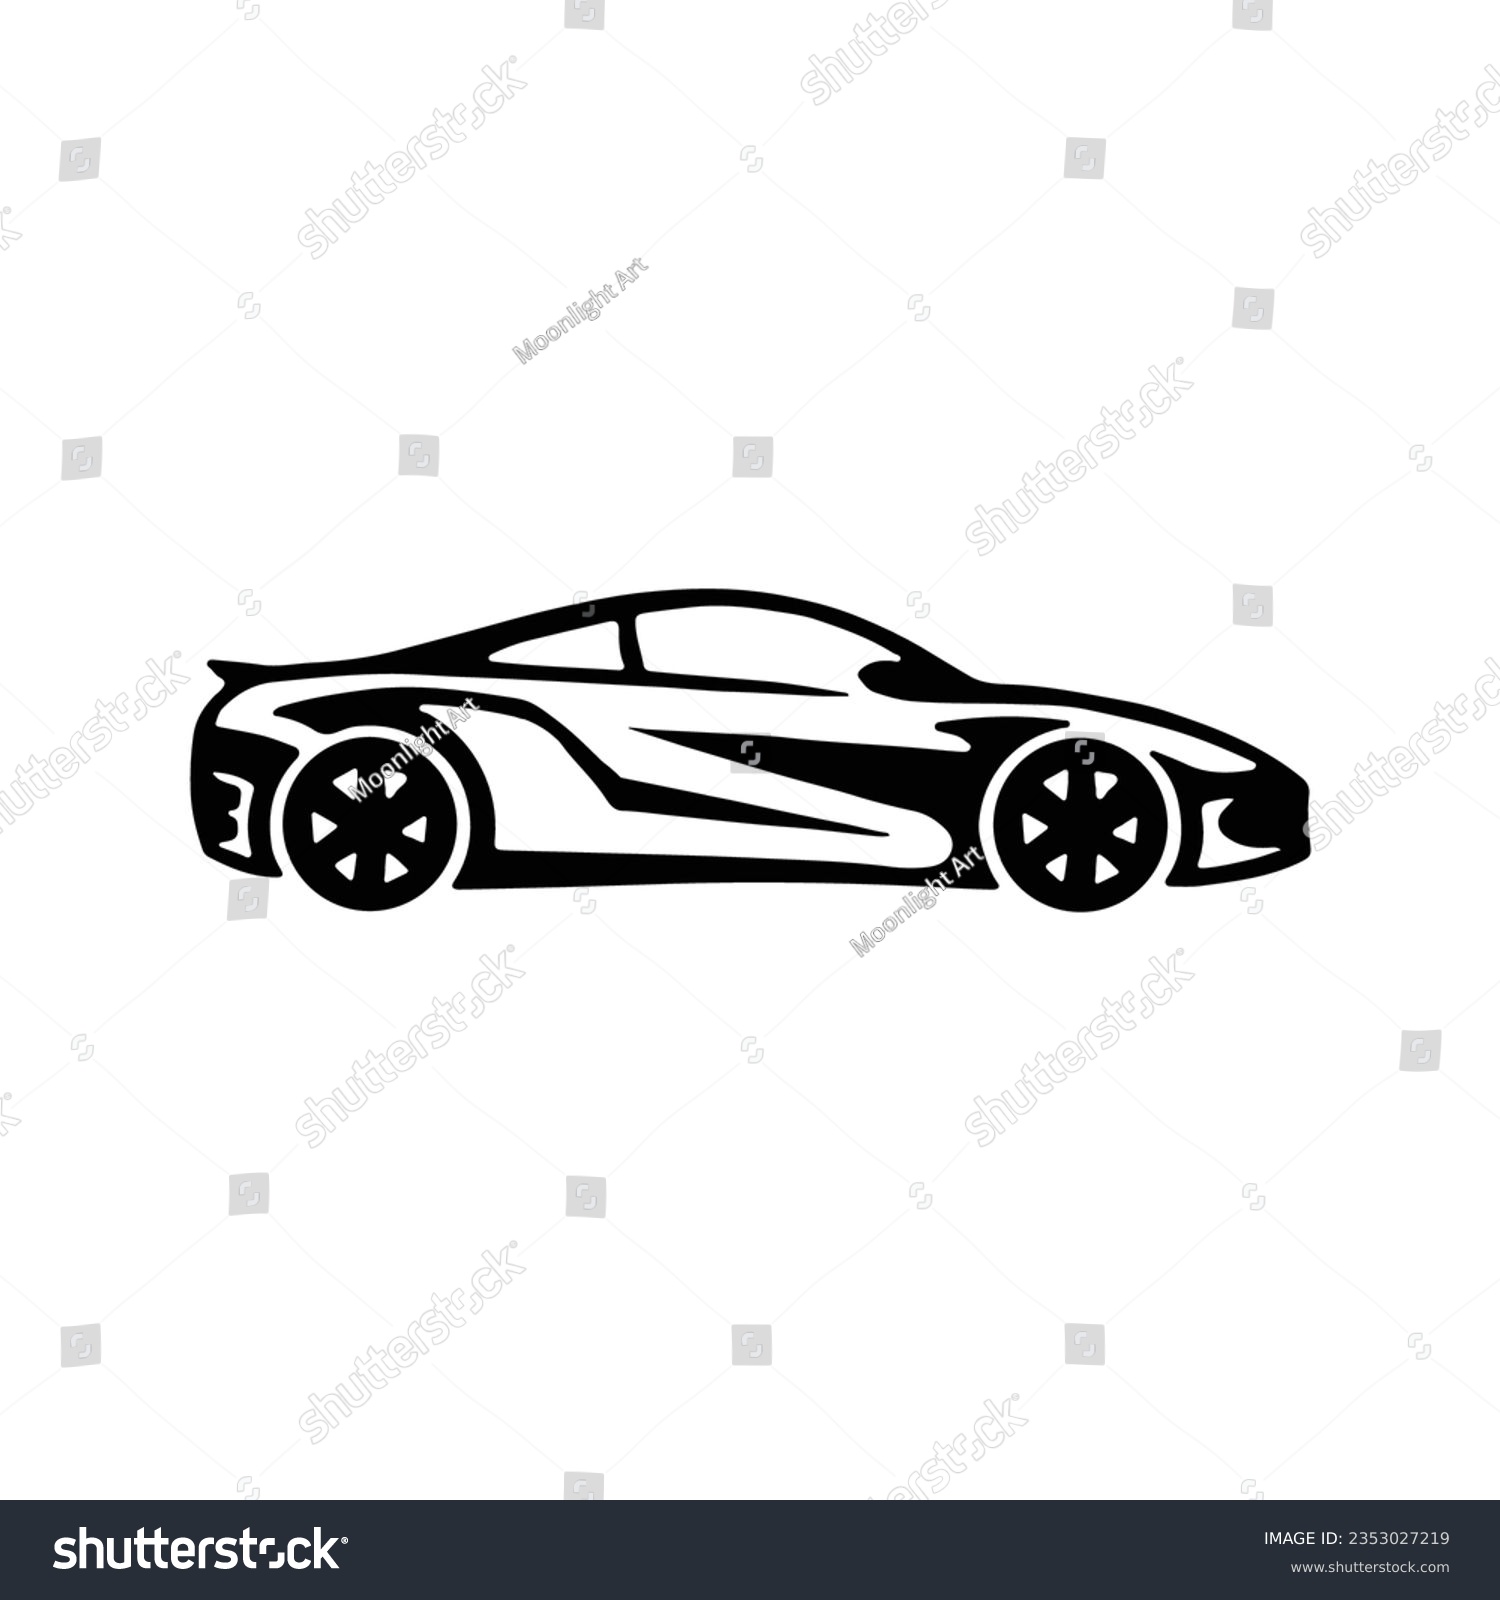 SVG of Sports Car Svg, Sports Car Silhouette, Luxury Car, Racing, Sports Clipart, Cut Files for Cricut, Silhouette Svg, Svg Files for Cricut svg